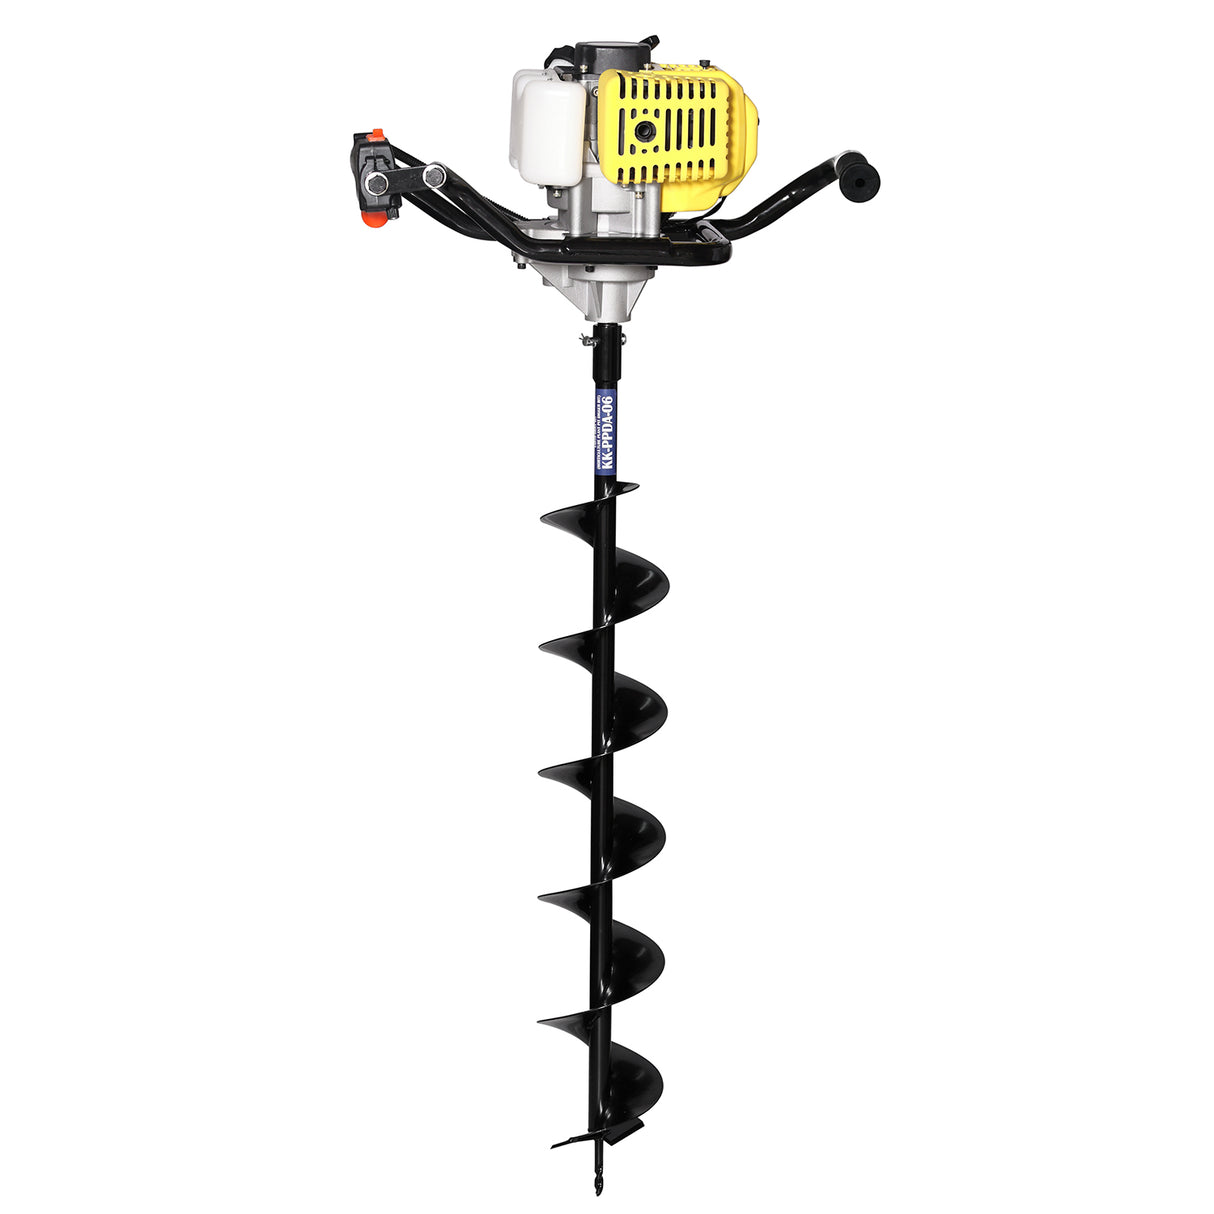 Earth Auger, 71 CC, 3.2 HP, 2 Stroke, For Agriculture Hole Digging ( Without Auger Bit )